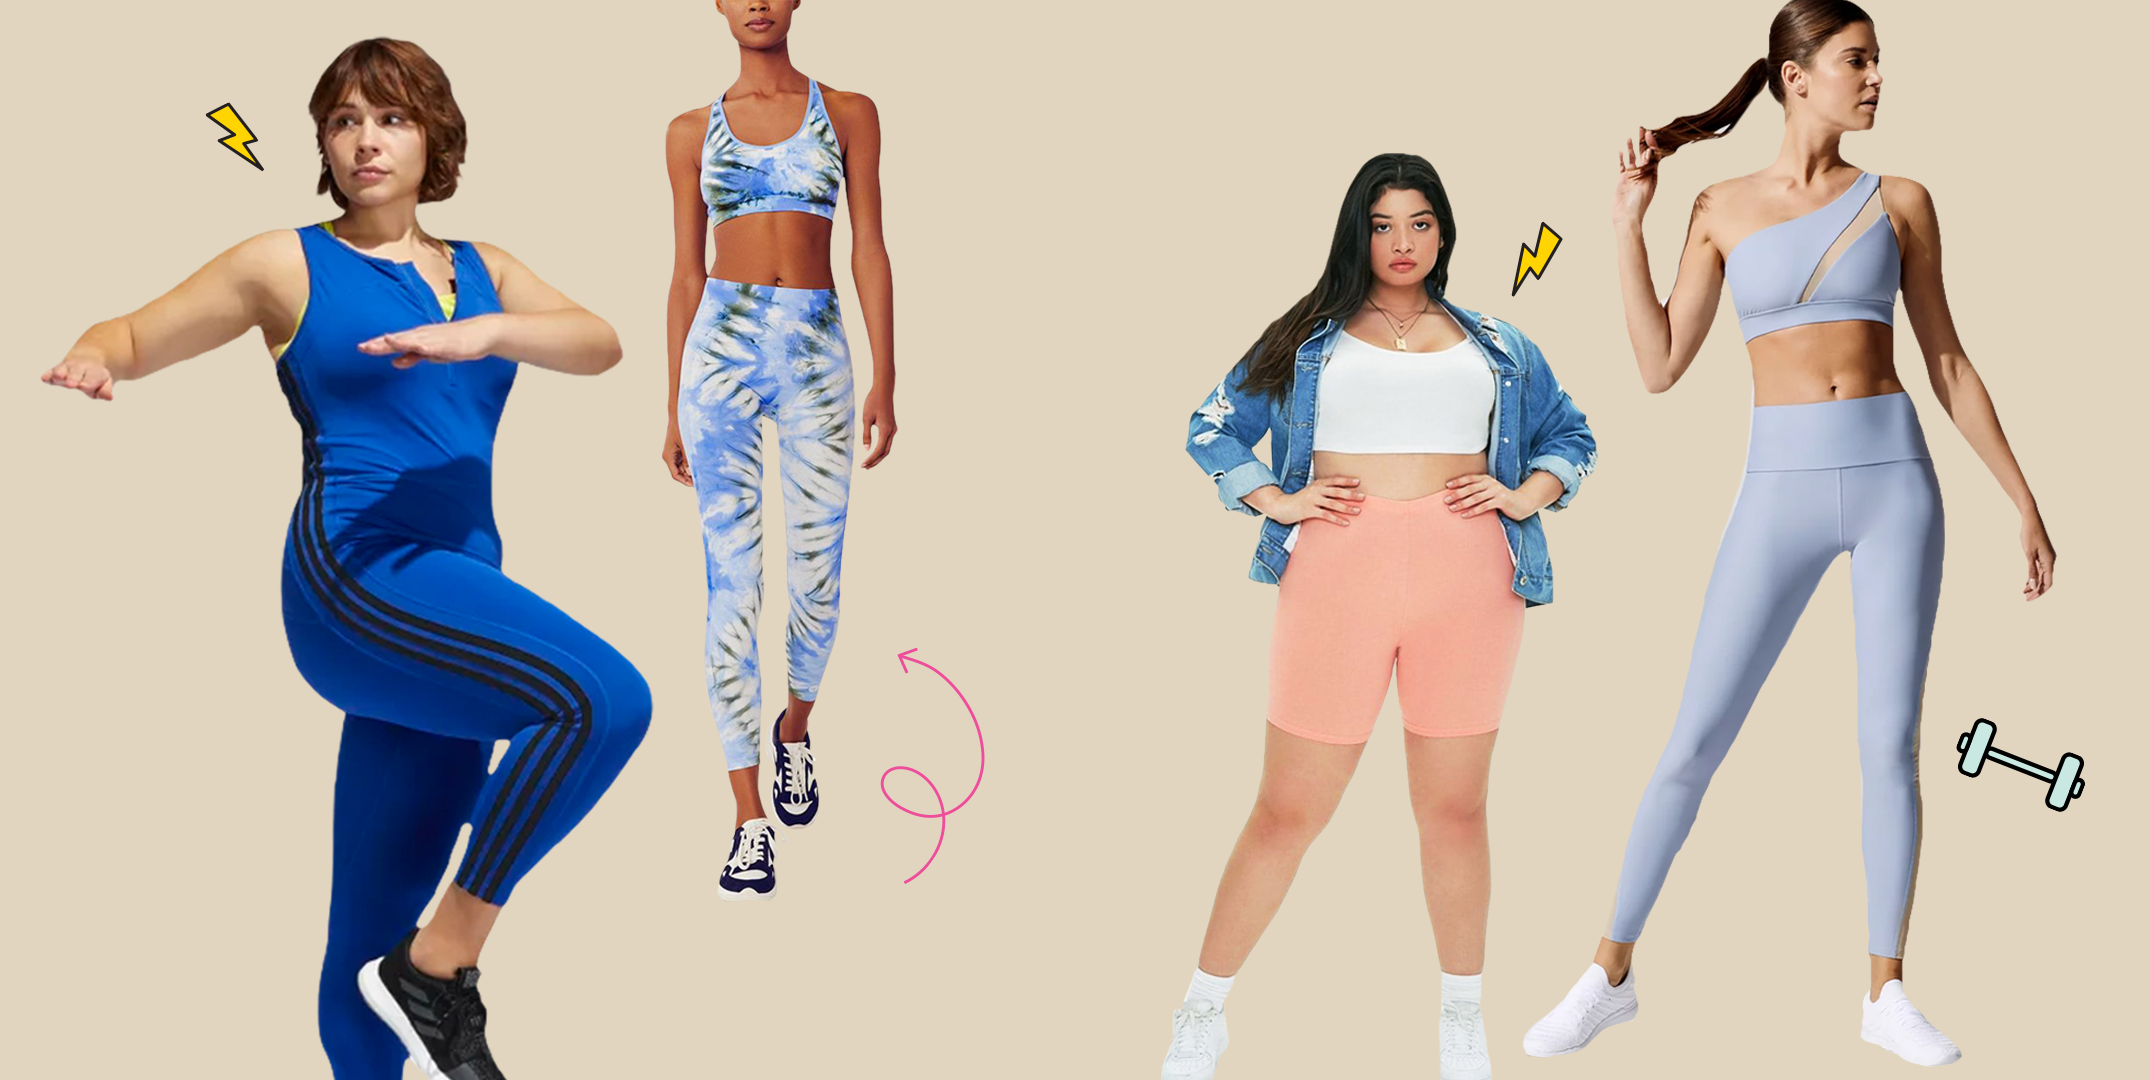 Gym Outfits Thatll Make You Want to Work Out — Cute Workout Clothes, Activewear